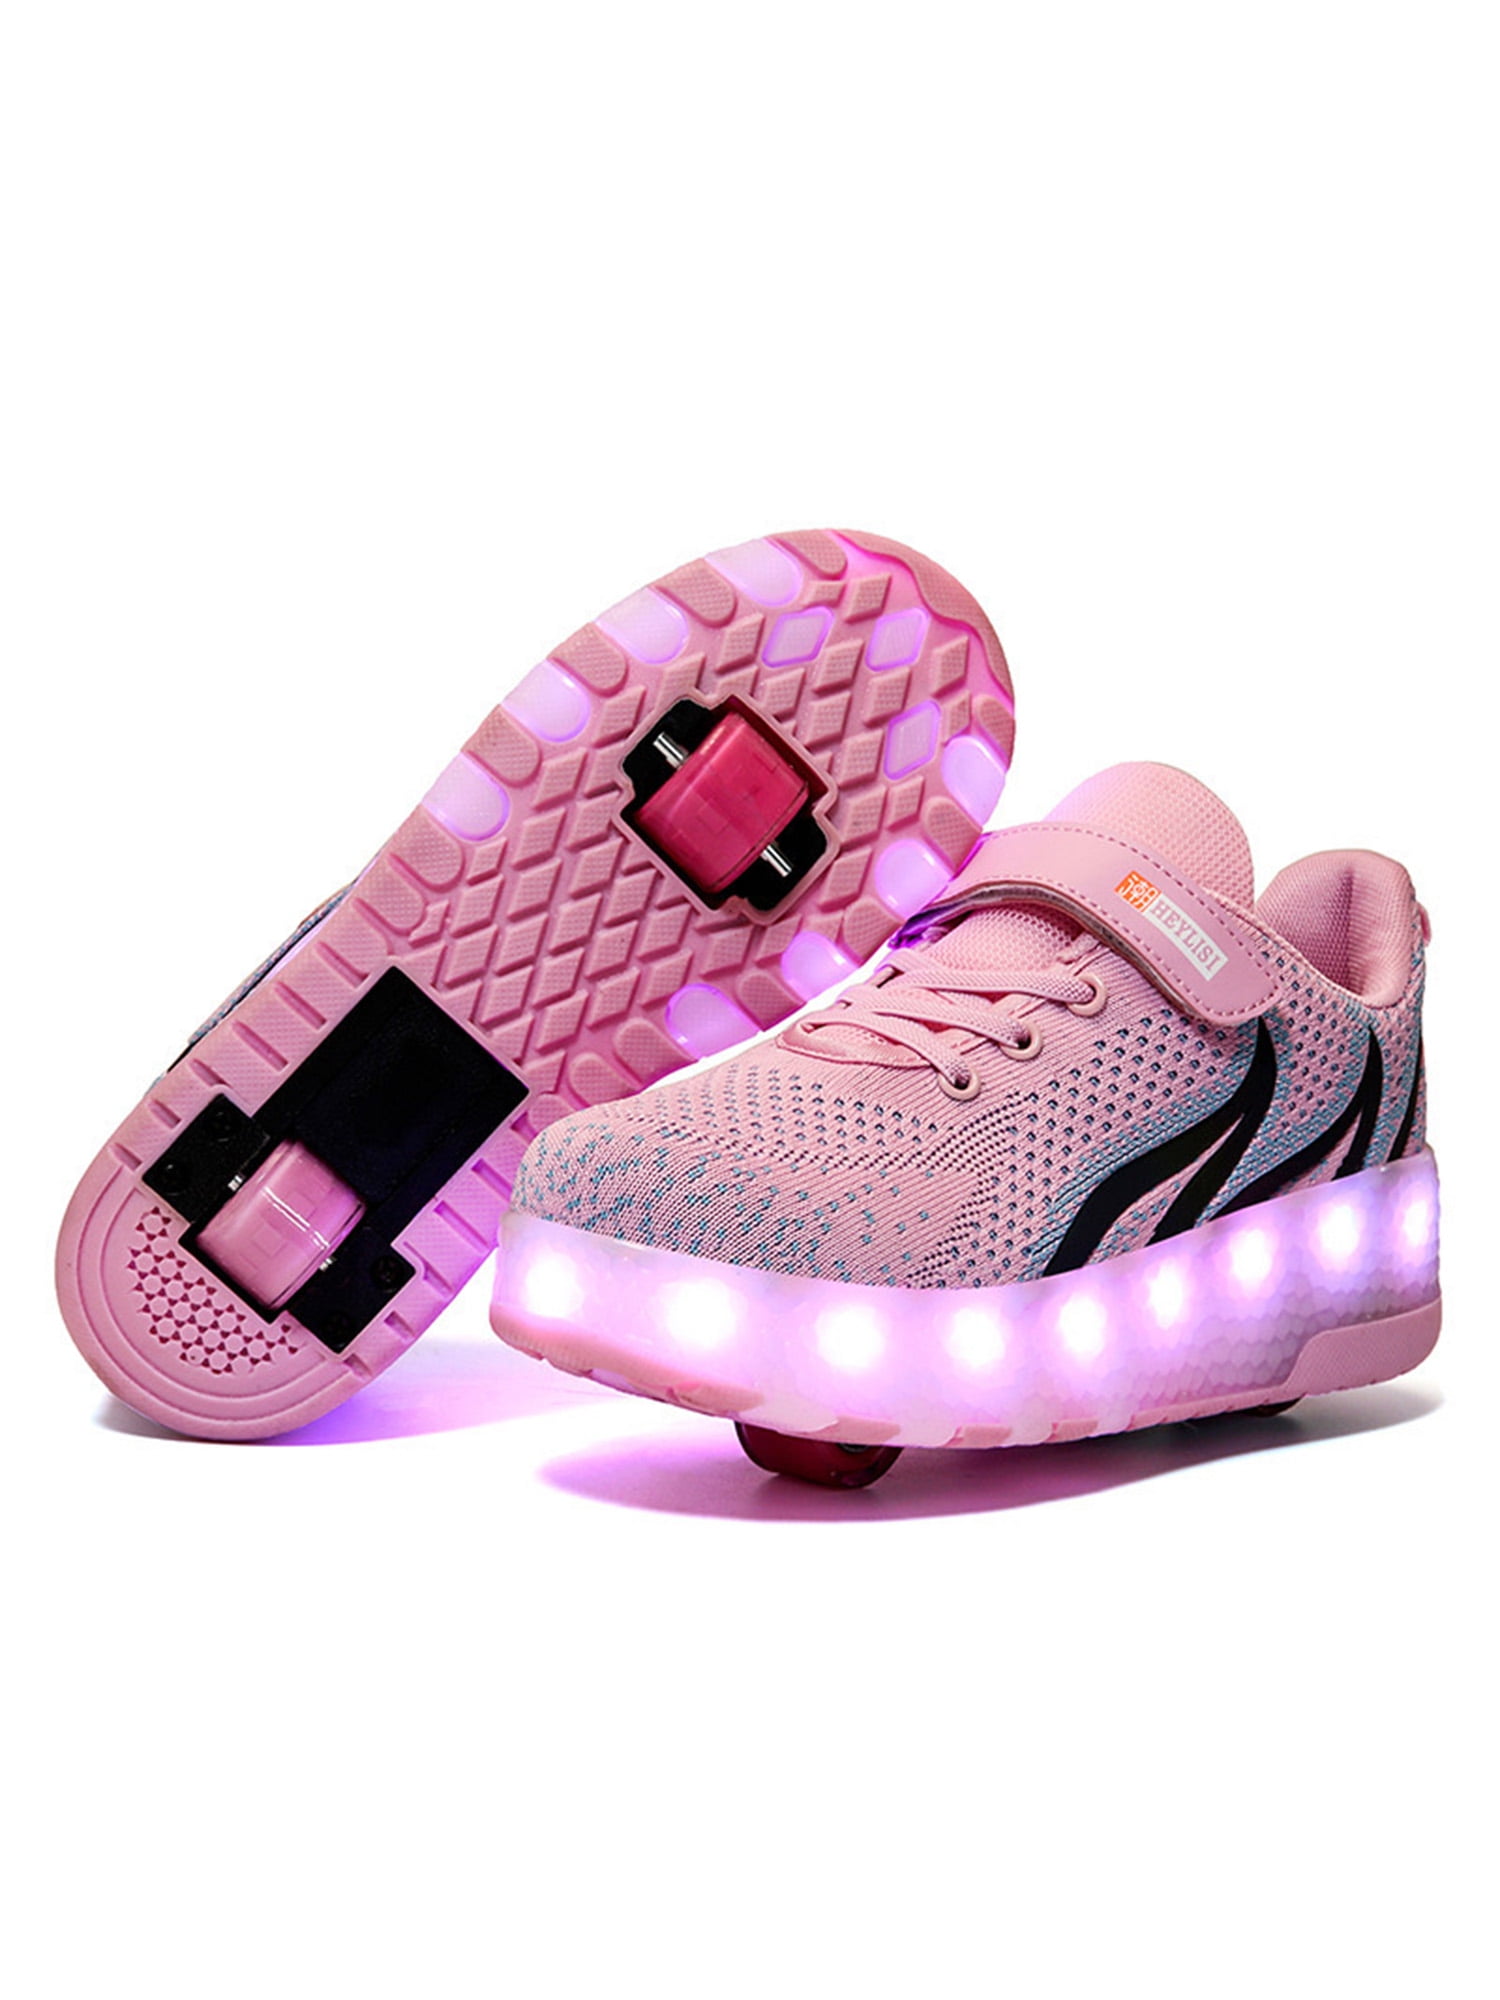 LED Children Boys Girls Light Up Sneakers Baby Luminous Shoes Trainers Kids Gift 